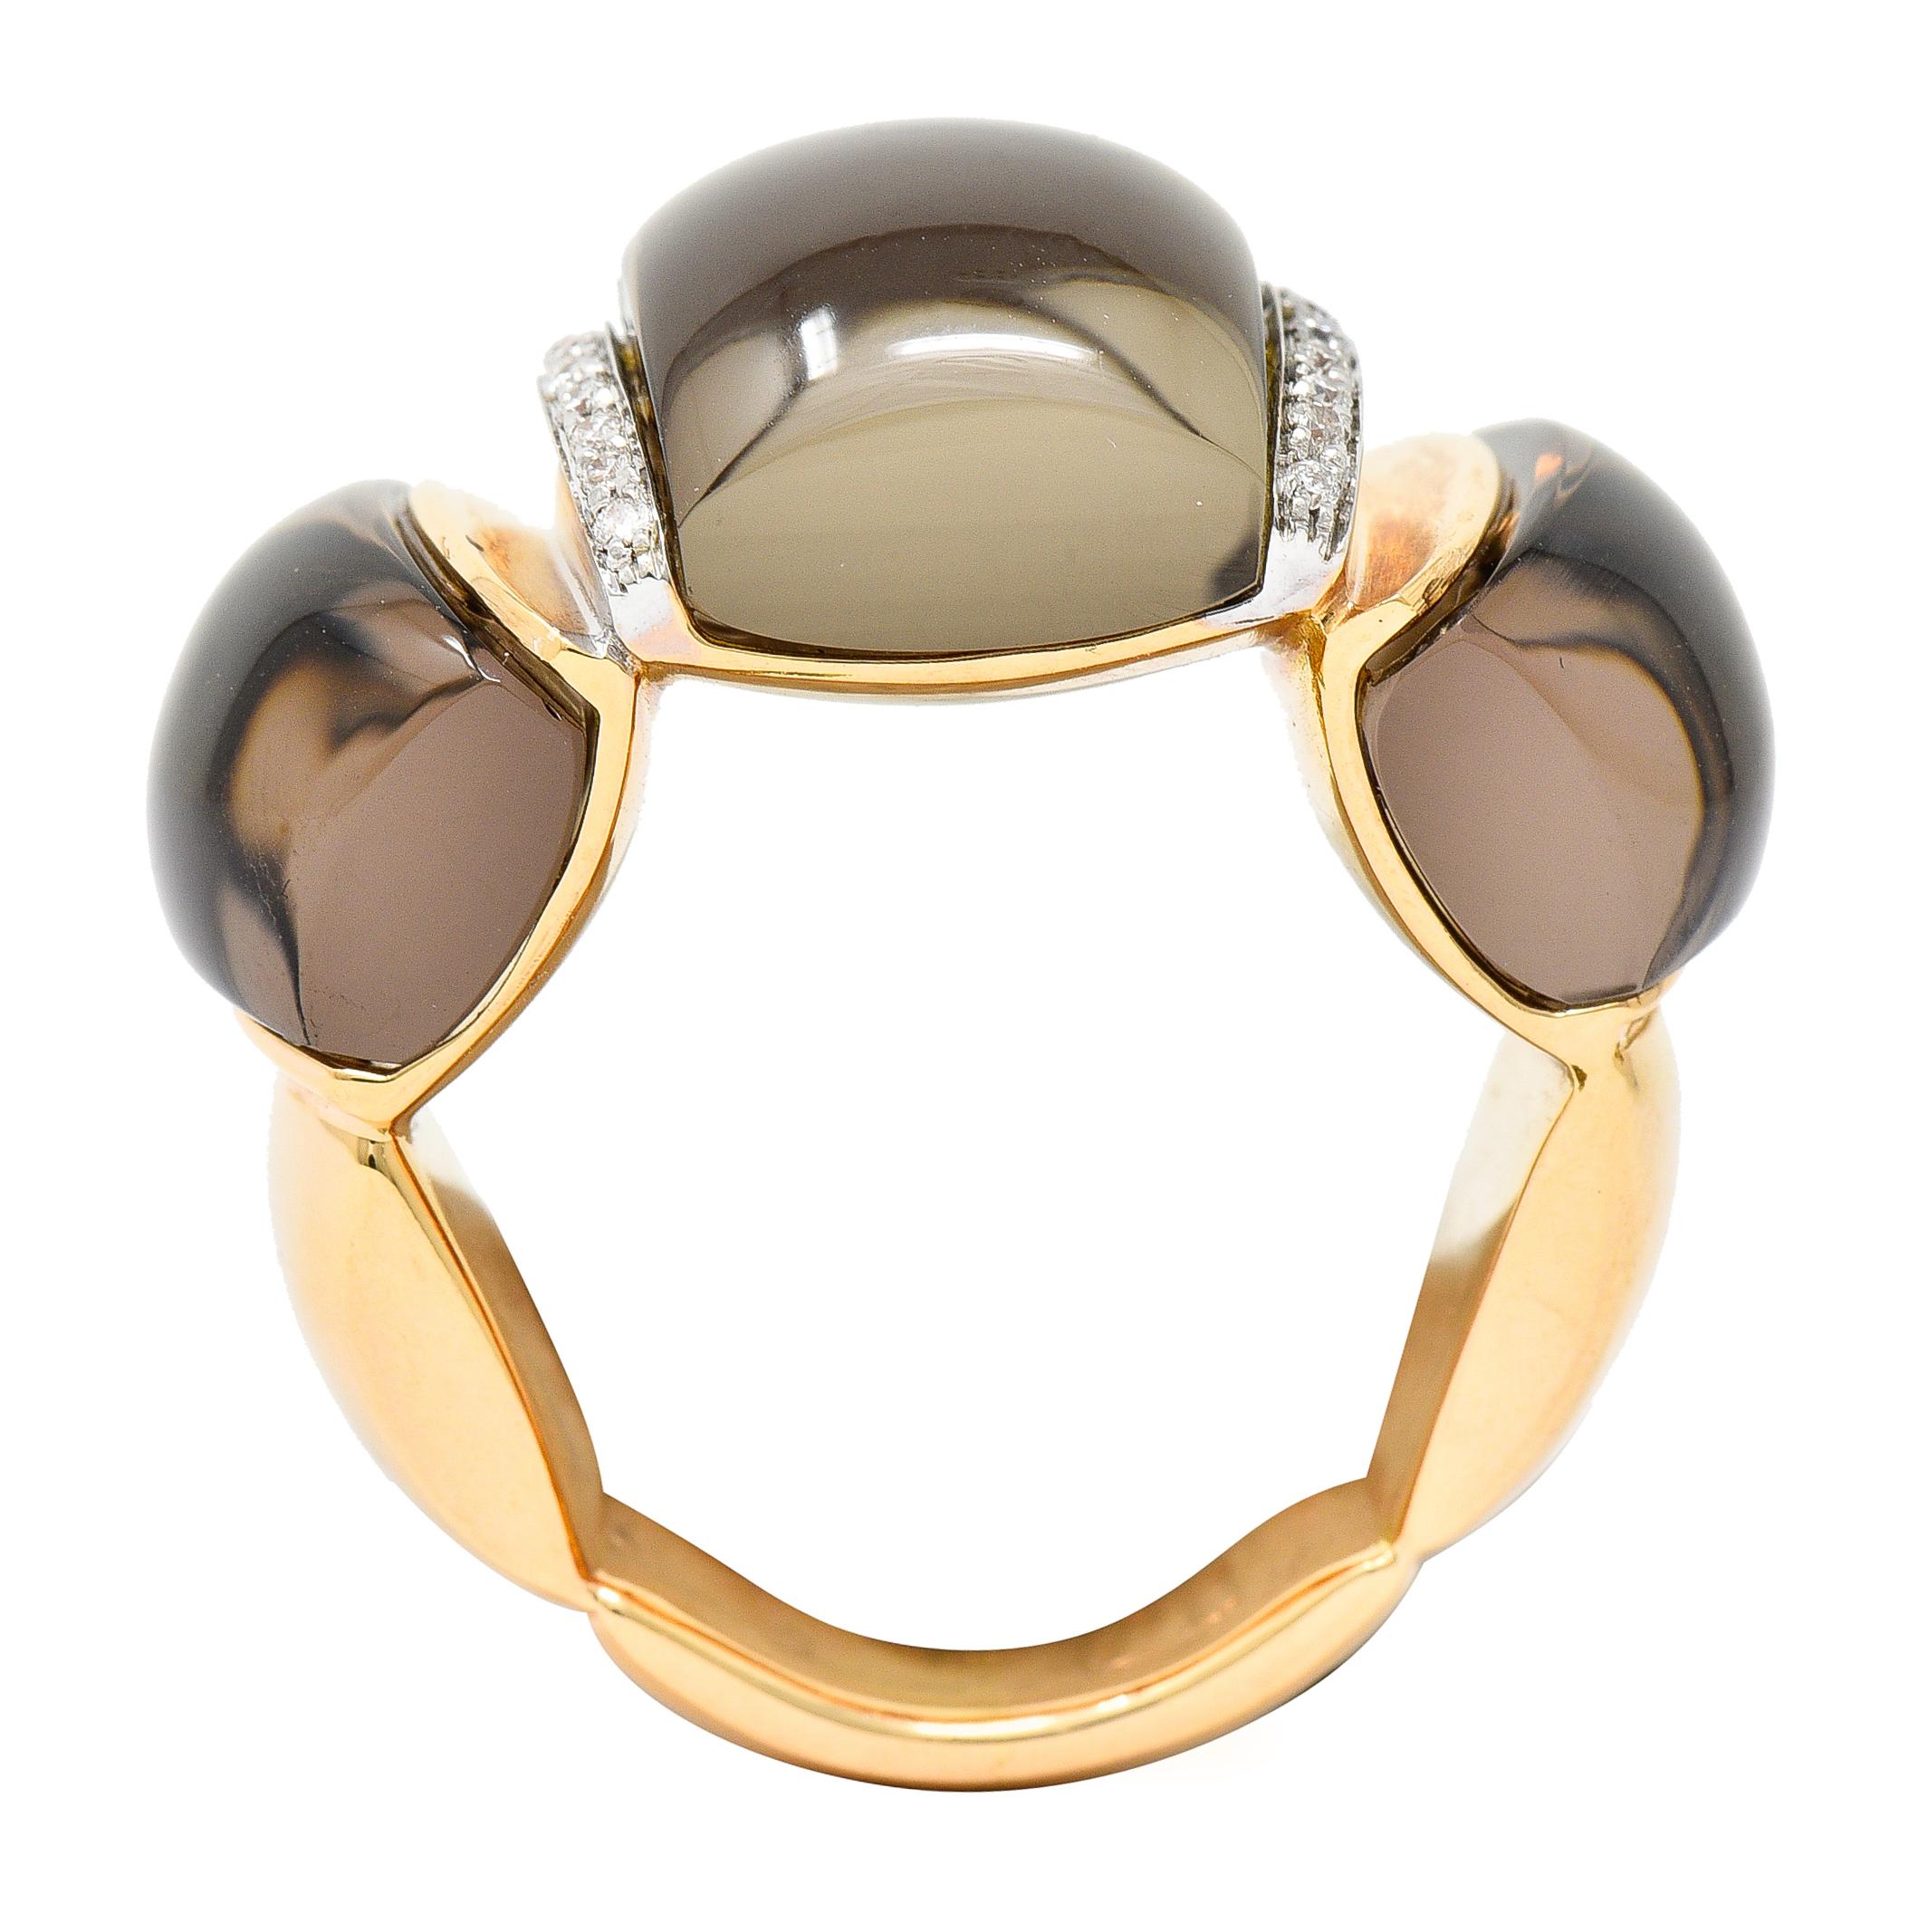 Deeply fluted band ring features three cushion cabochons of smokey quartz. Measuring approximately 16.5 x 10.8 mm to 15.0 x 8.5 mm. Very well matched, eye clean, and light brown in color. Cabochons are separated by white gold bars accented by round